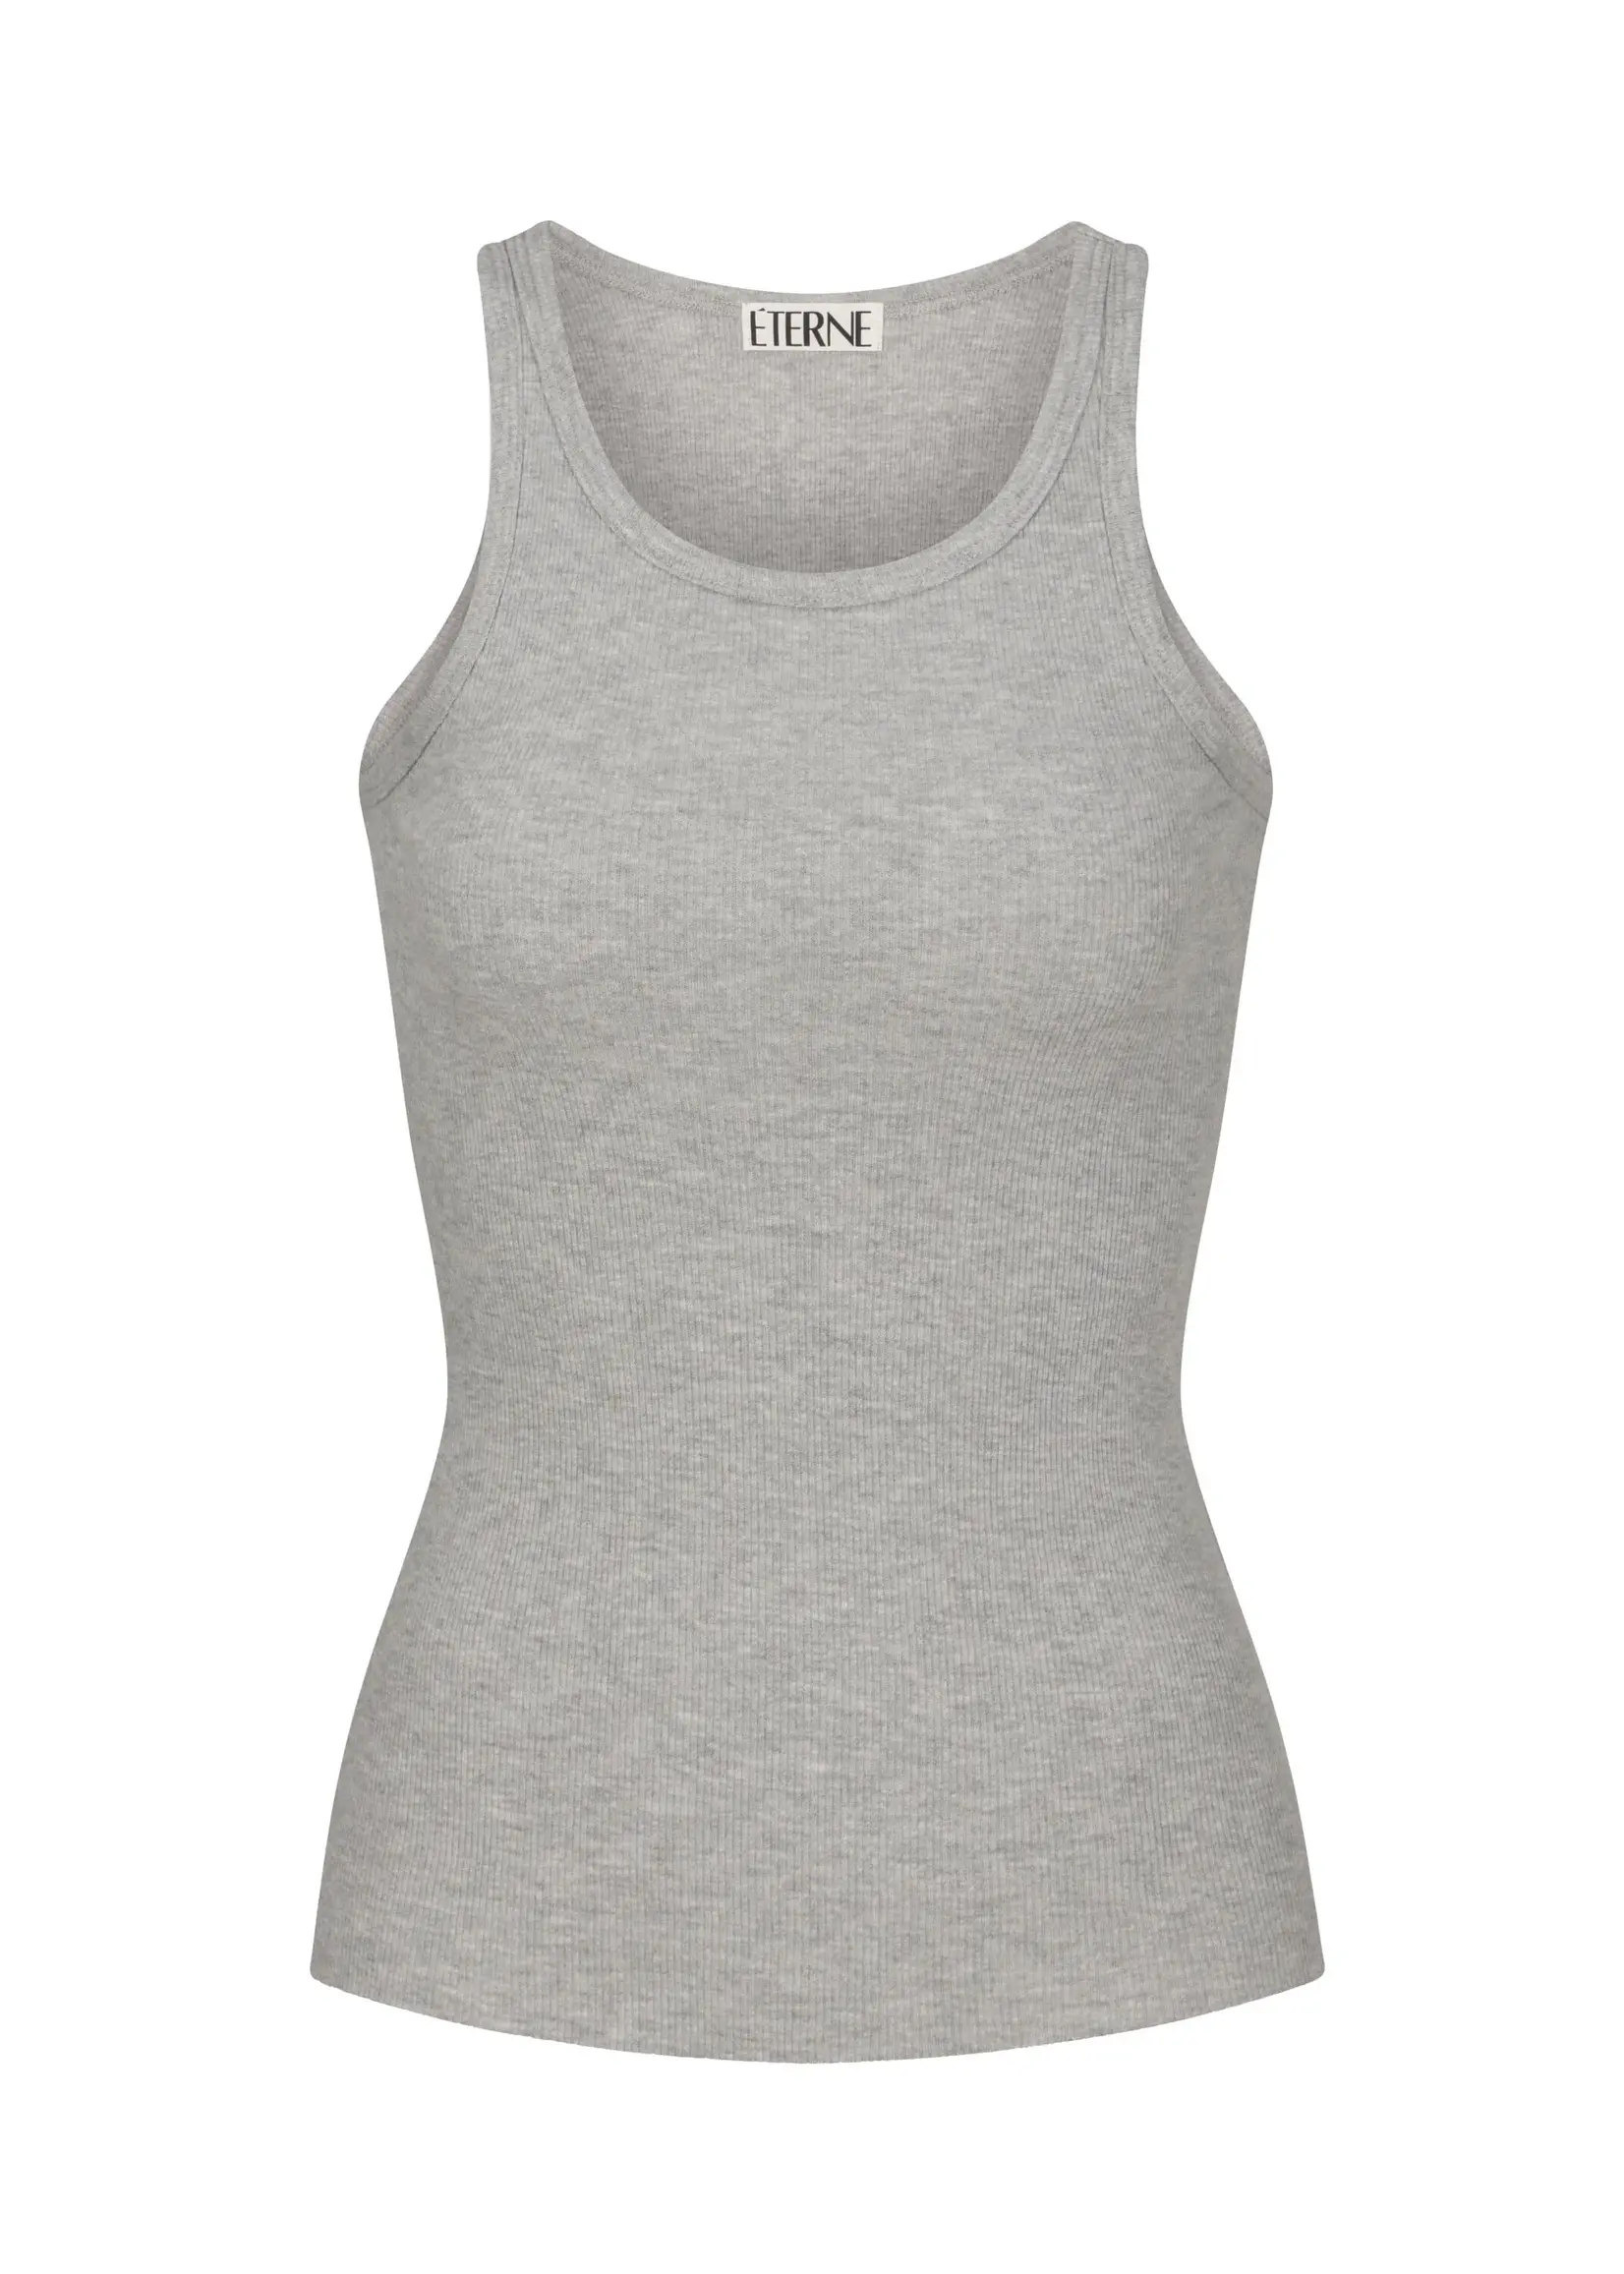 eterne High neck fitted tank - Heather grey